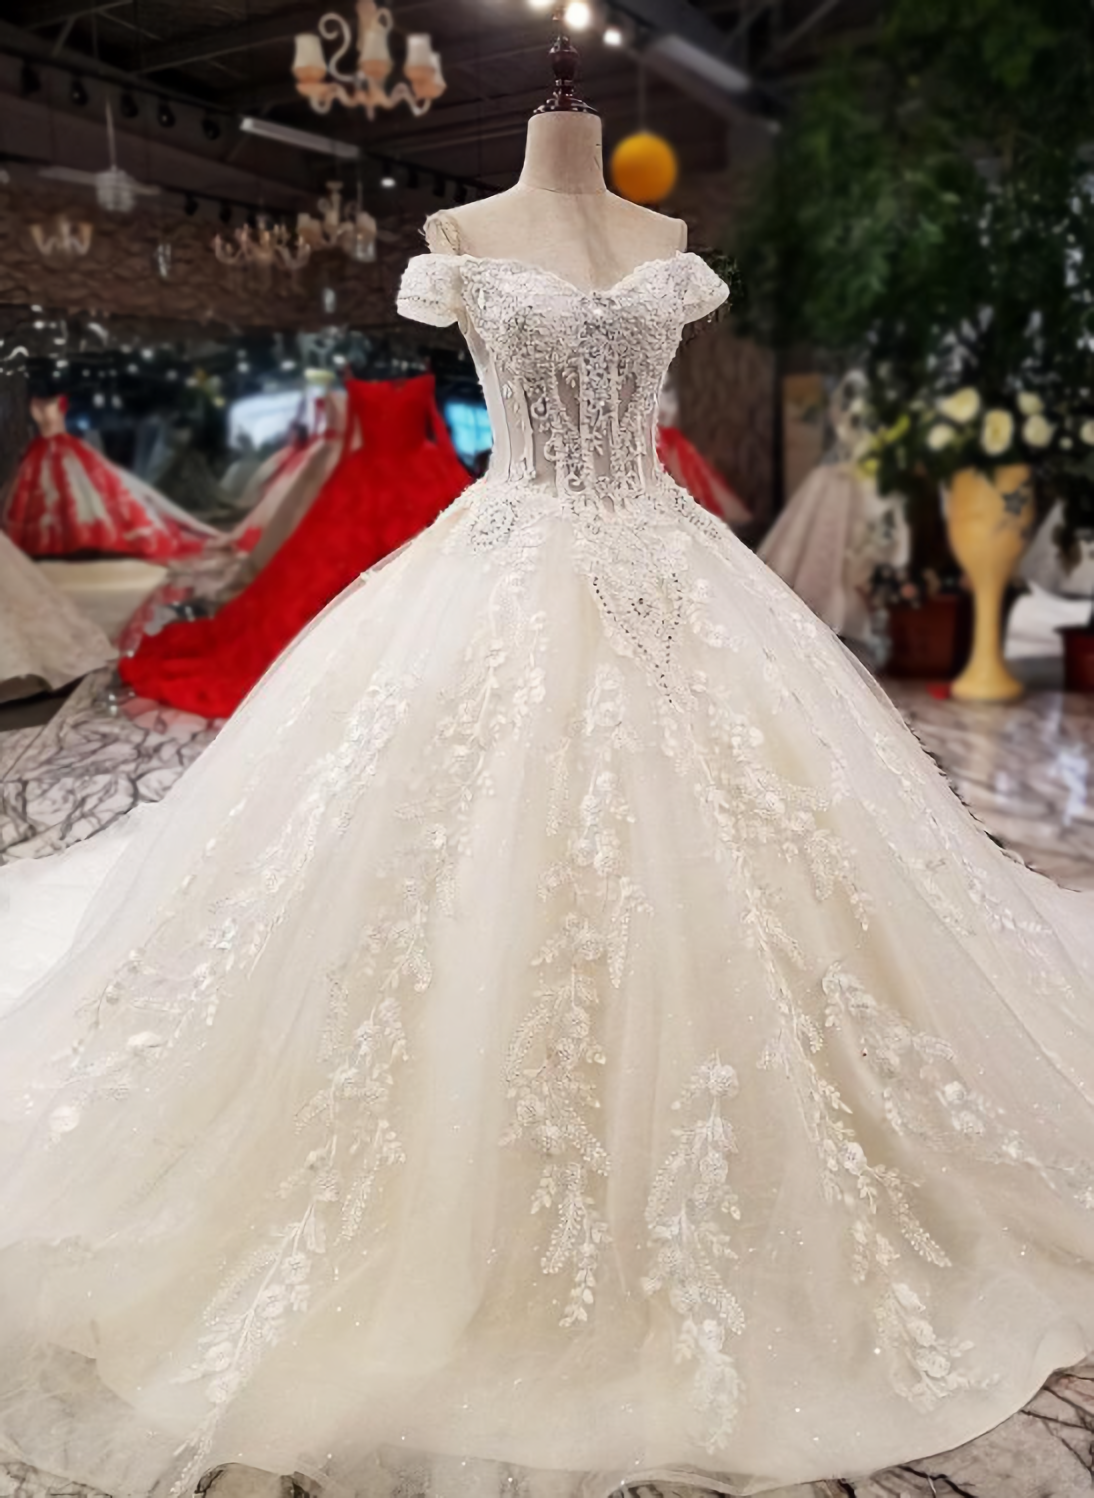 Attractive Tulle Off-The-Shoulder Neckline Ball Gown Wedding Dress With Lace Appliques & Beadings